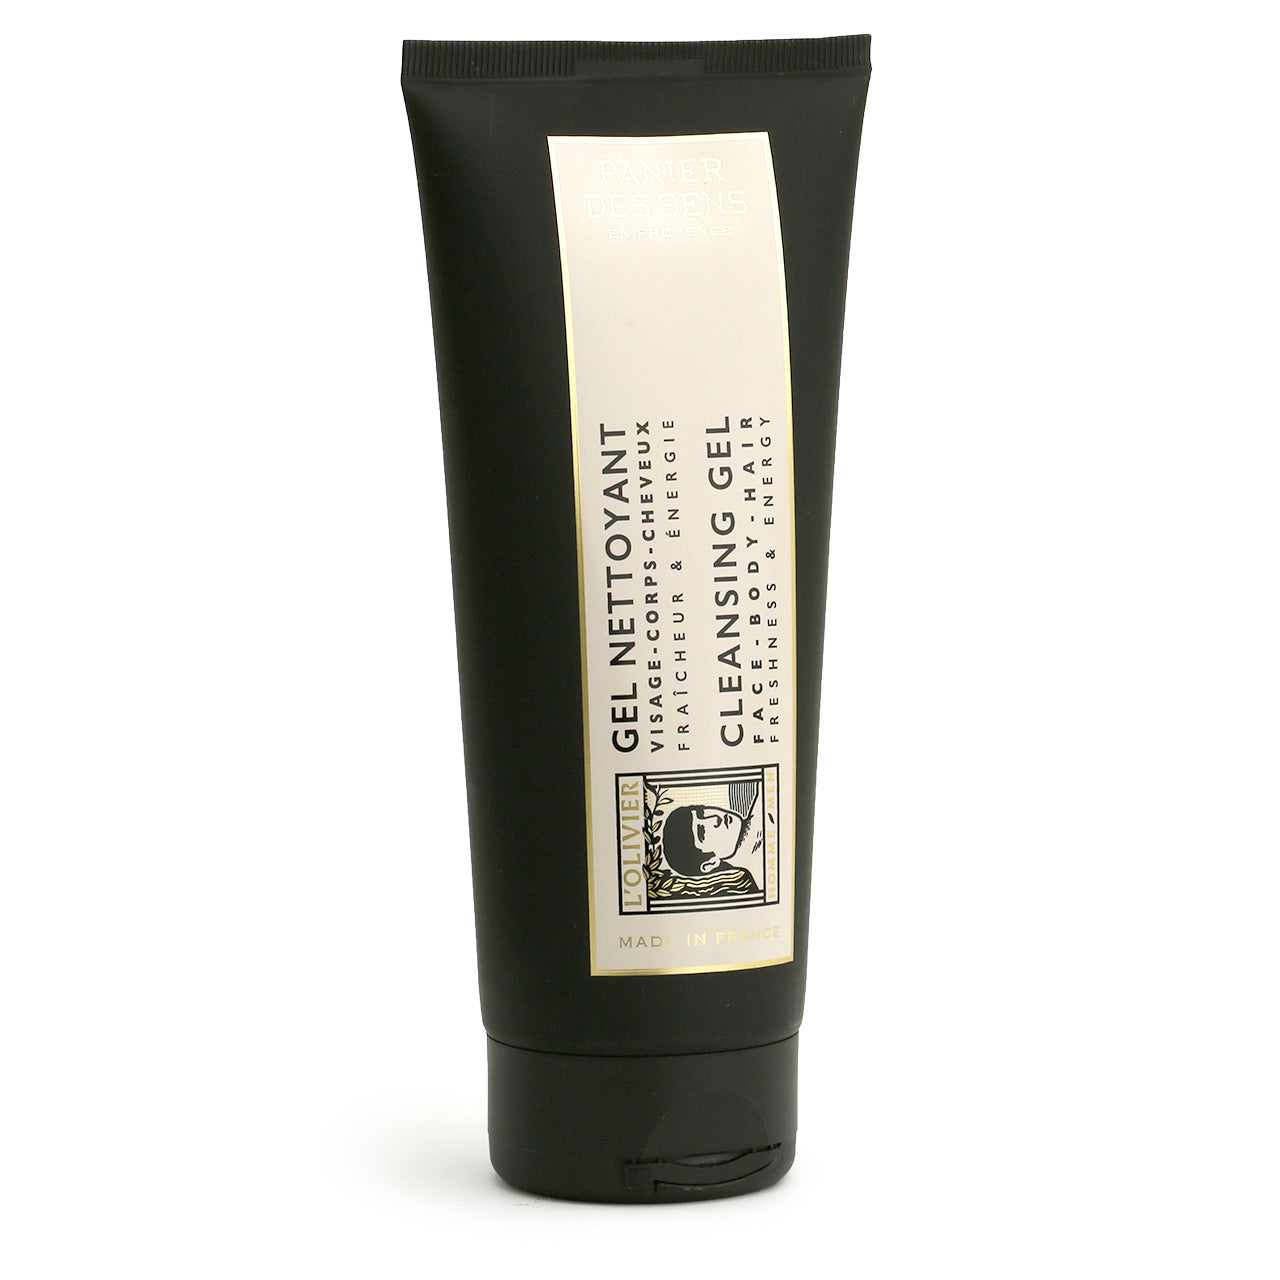 Cleansing Gel for face, body and hair black tube with black cream and gold coloured graphics